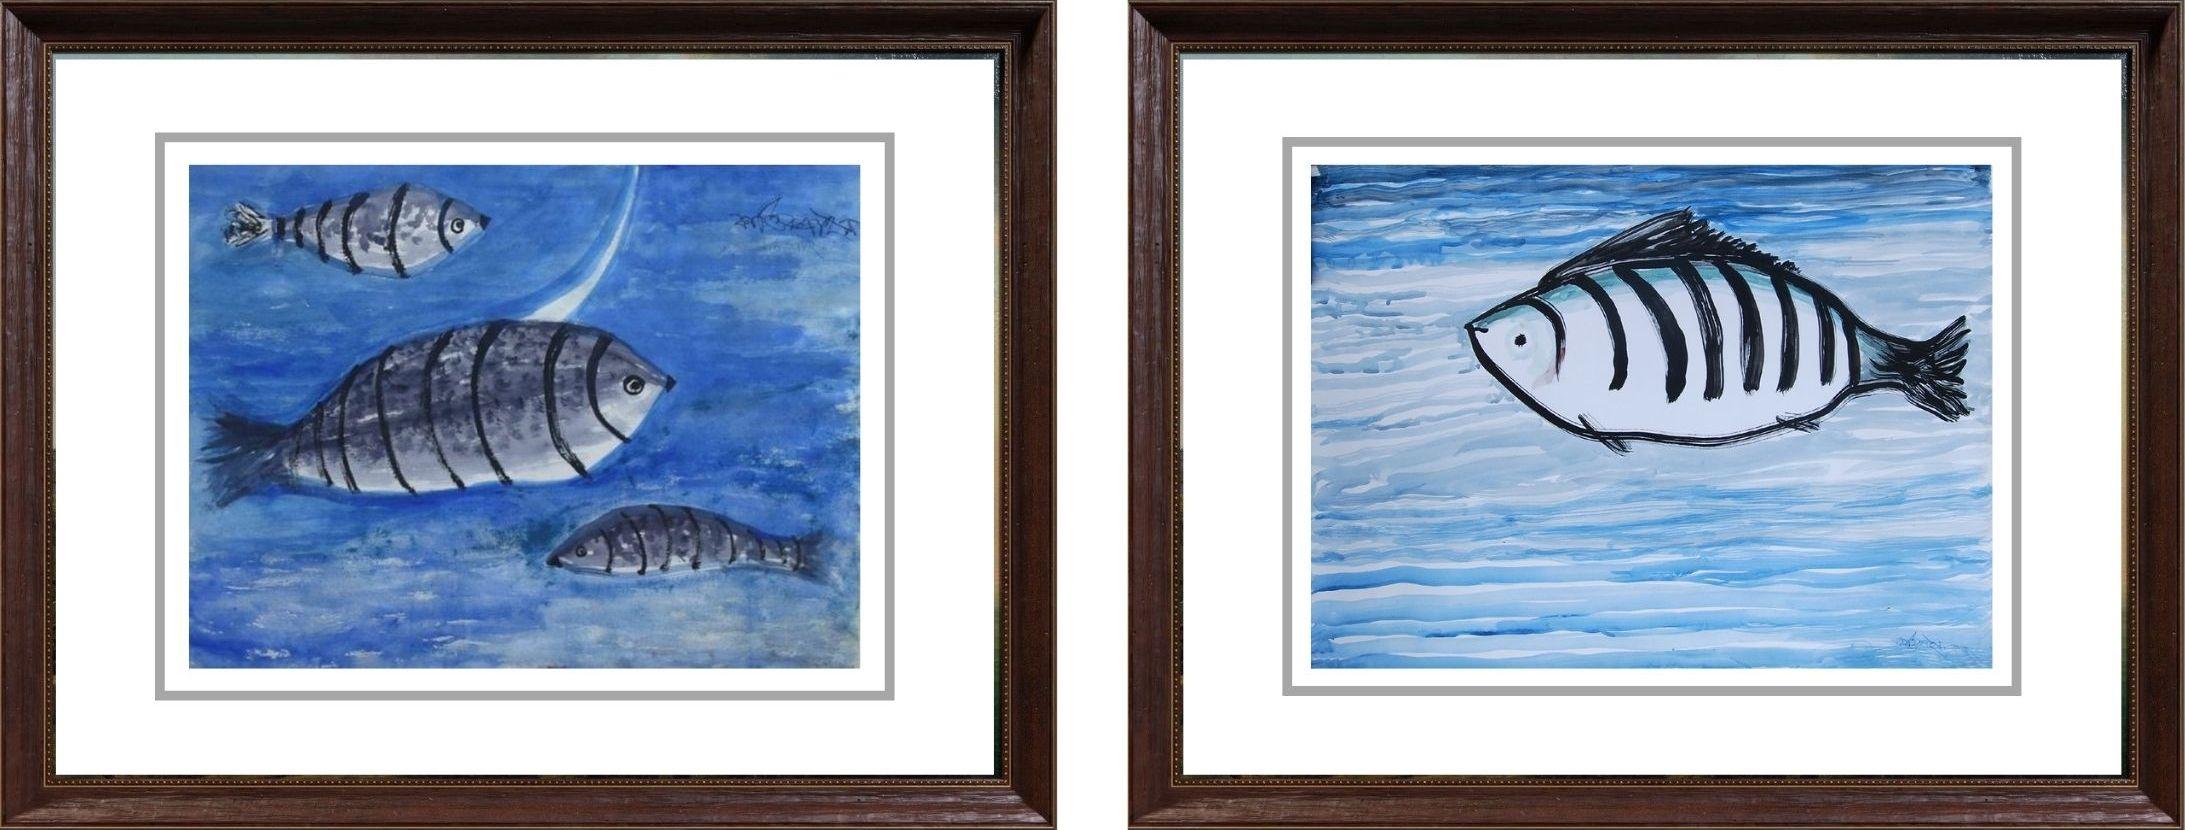 Kartick Chandra Pyne Animal Painting - Fish under the Water, Watercolor on paper, Blue by Indian Artist "In Stock"